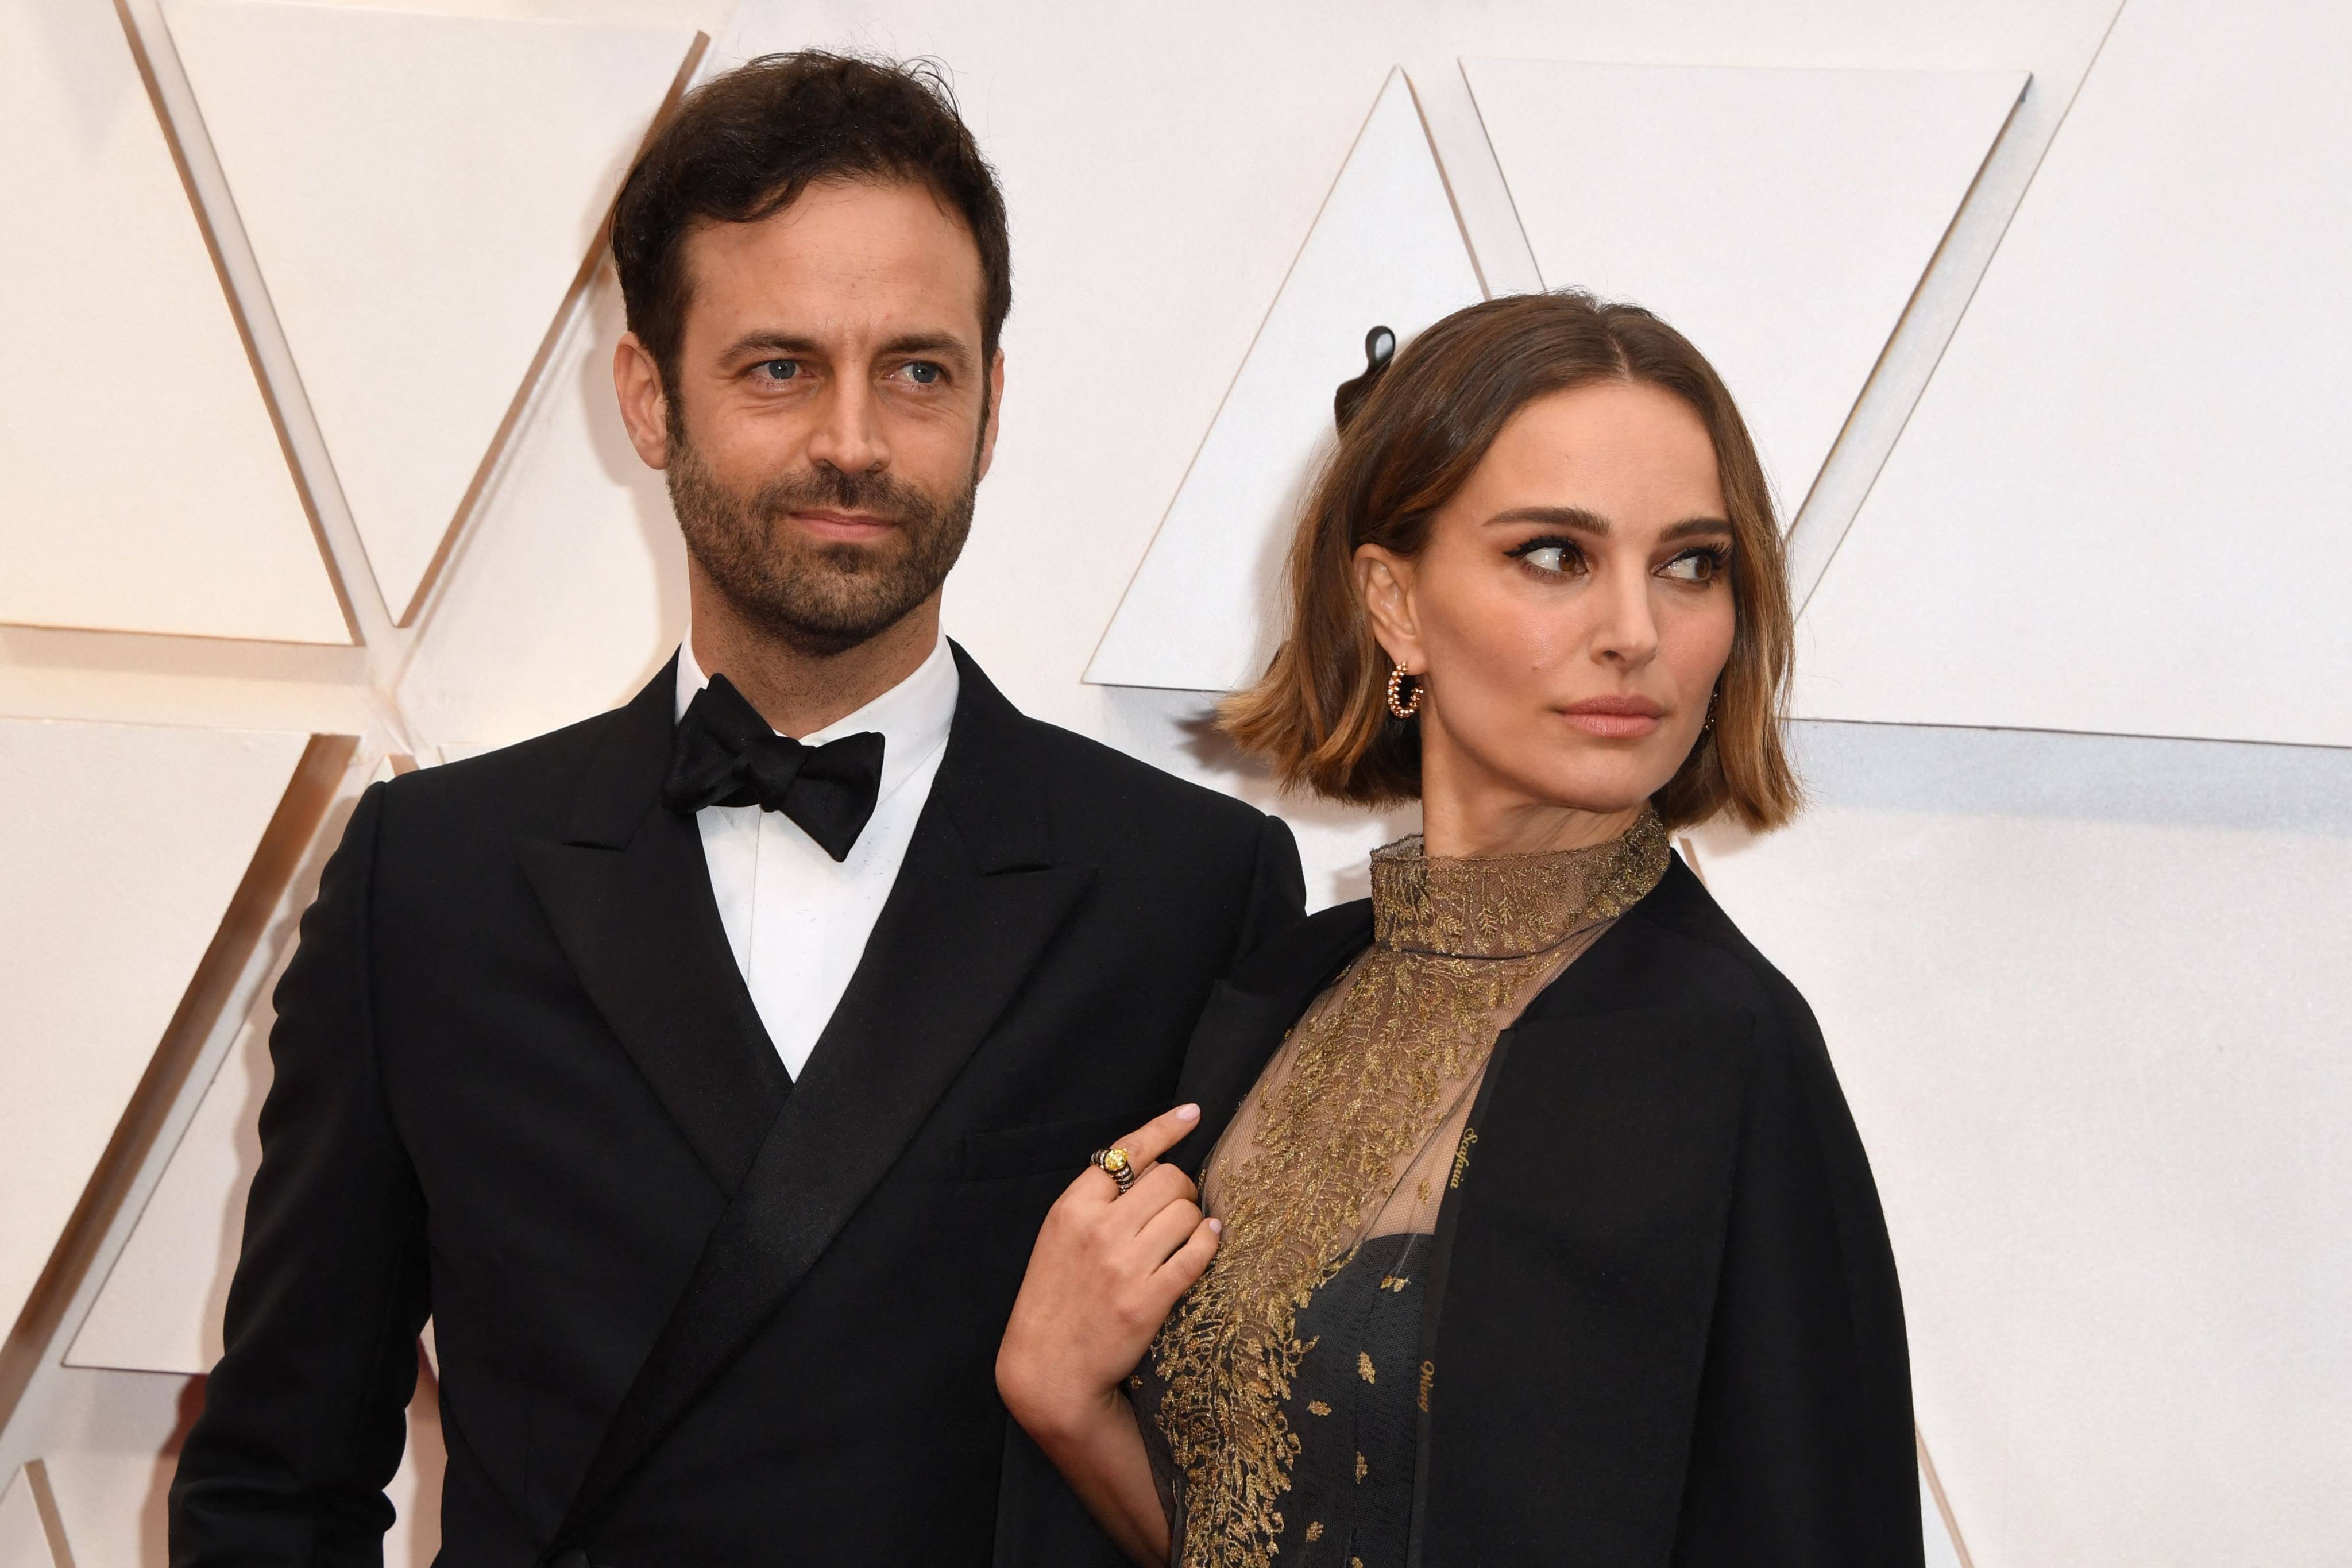 Actress Natalie Portman and her husband Benjamin Millepied arrive for the Academy Awards in California in 2020. Photo: AFP